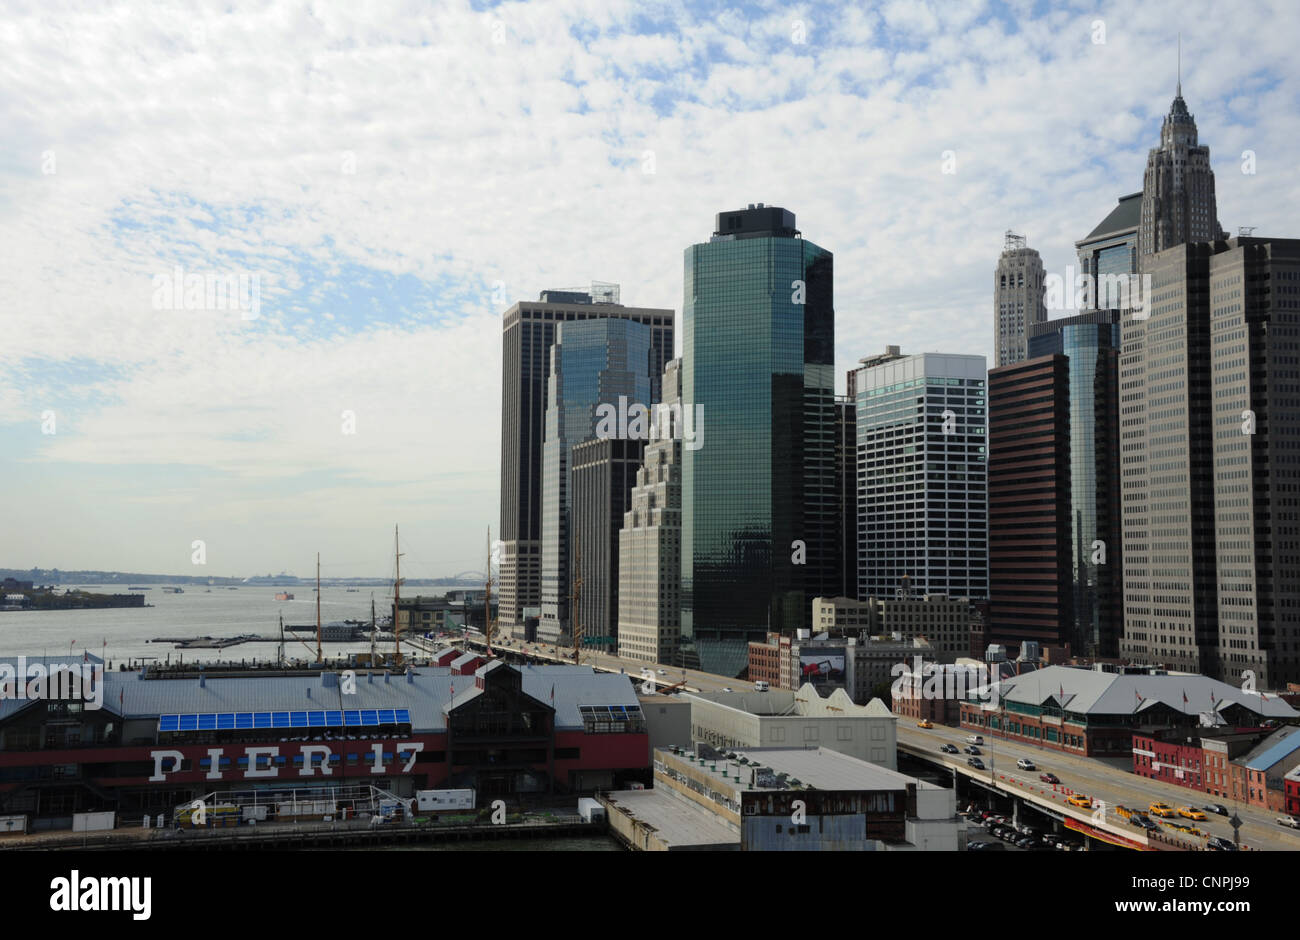 Autumn view, from Brooklyn Bridge, Pier 17, FDR Drive, Lower Manhattan Financial District skyscrapers, New York Stock Photo